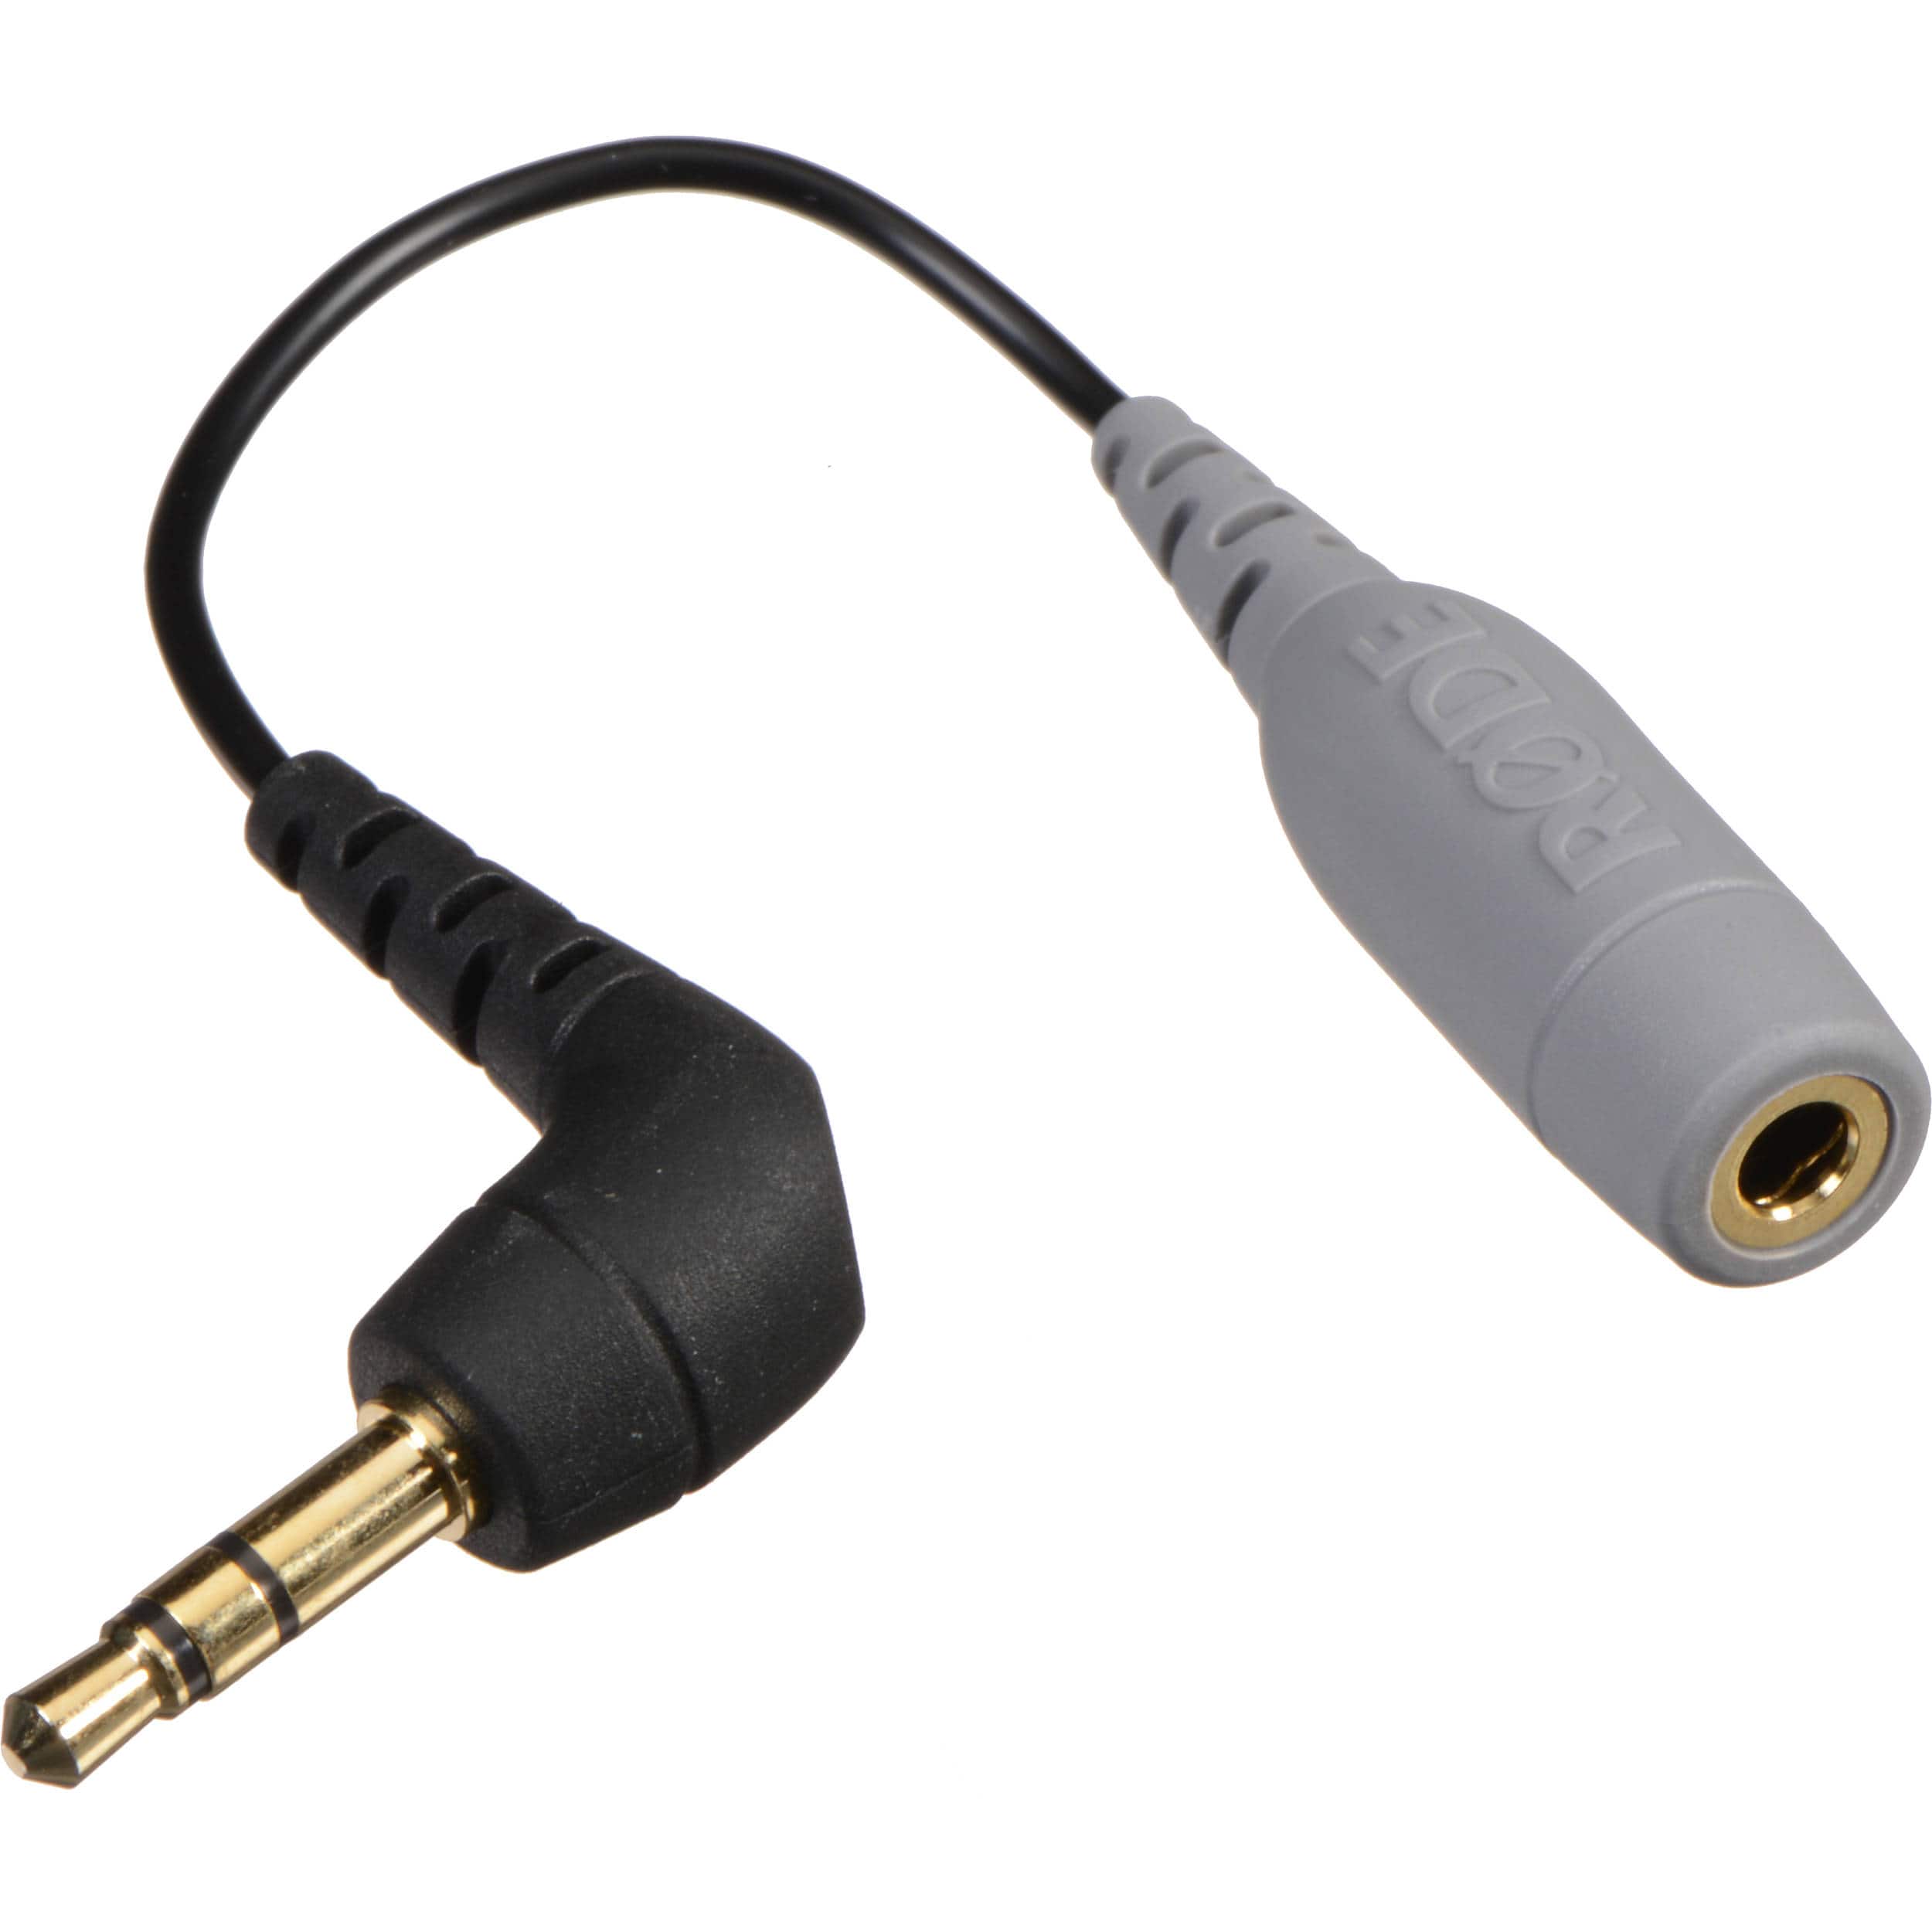 Rode SC4 3.5 mm TRS to TRRS Microphone Cable Adaptor